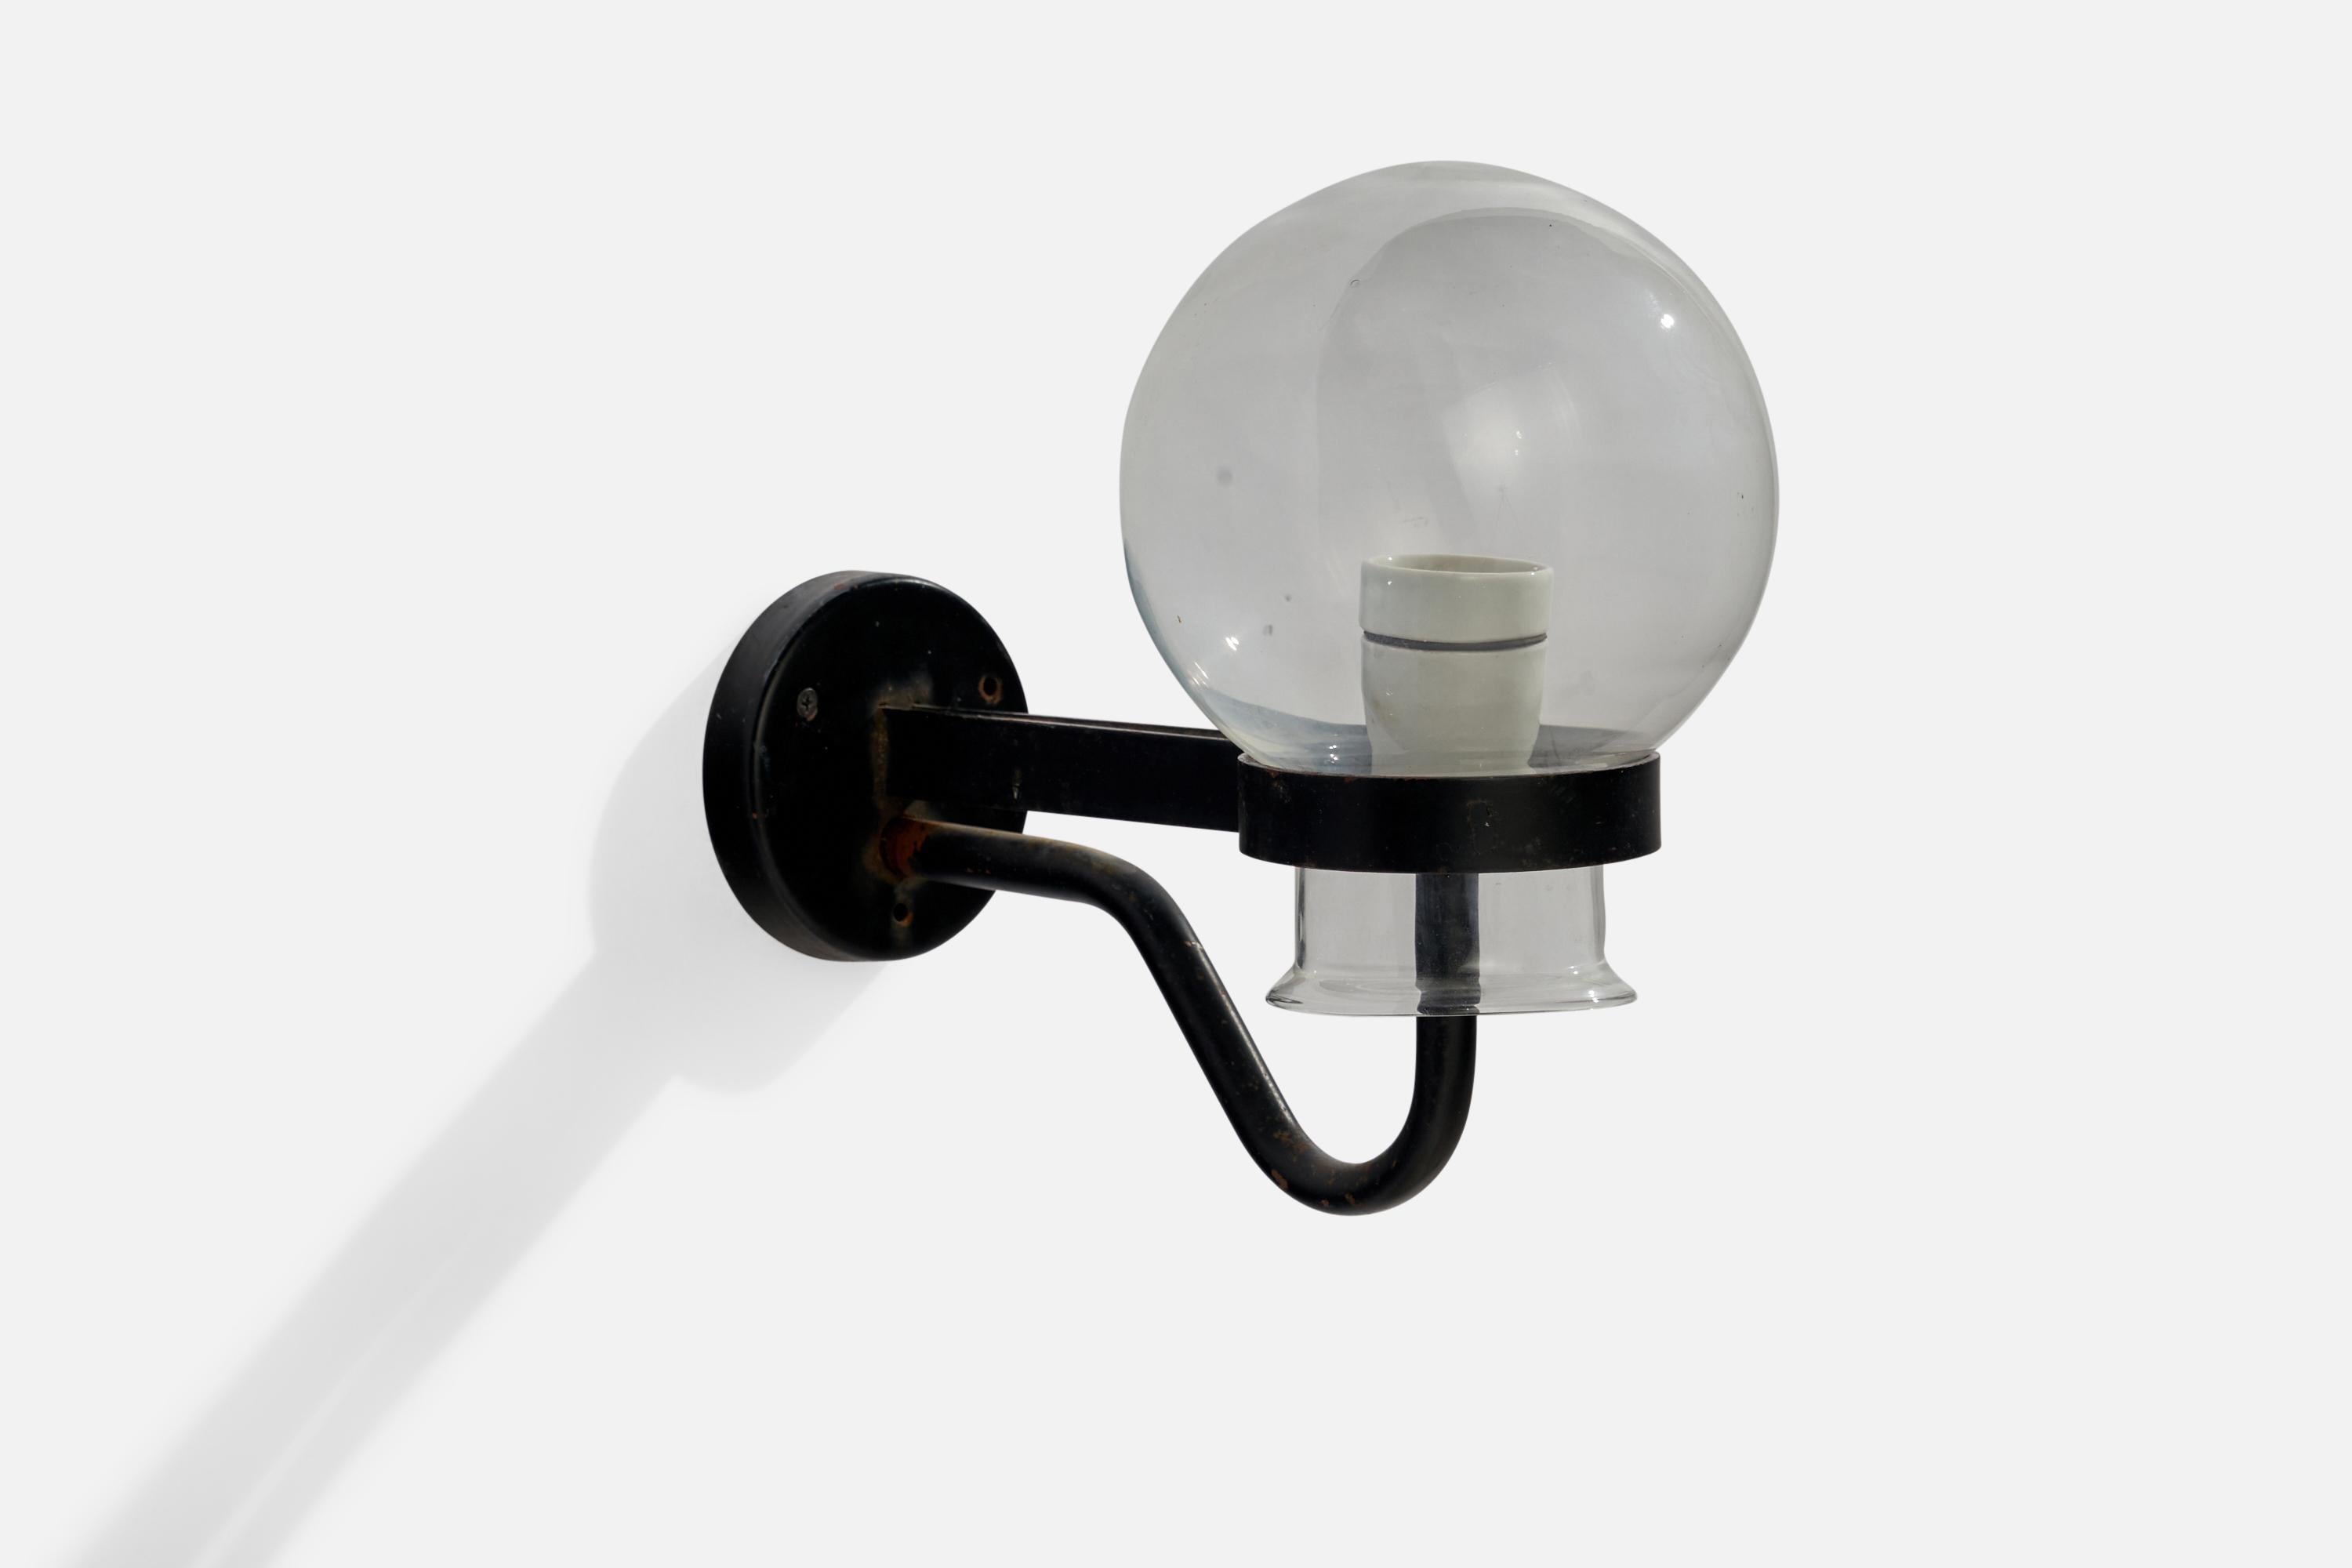 A blown glass and black-painted copper wall light designed and produced in Sweden, 1940s.

Overall Dimensions (inches): 11” H x 7” W x 13” D
Back Plate Dimensions (inches): 4.25” H x 4.25”  W x .75” D
Bulb Specifications: E-26 Bulb
Number of